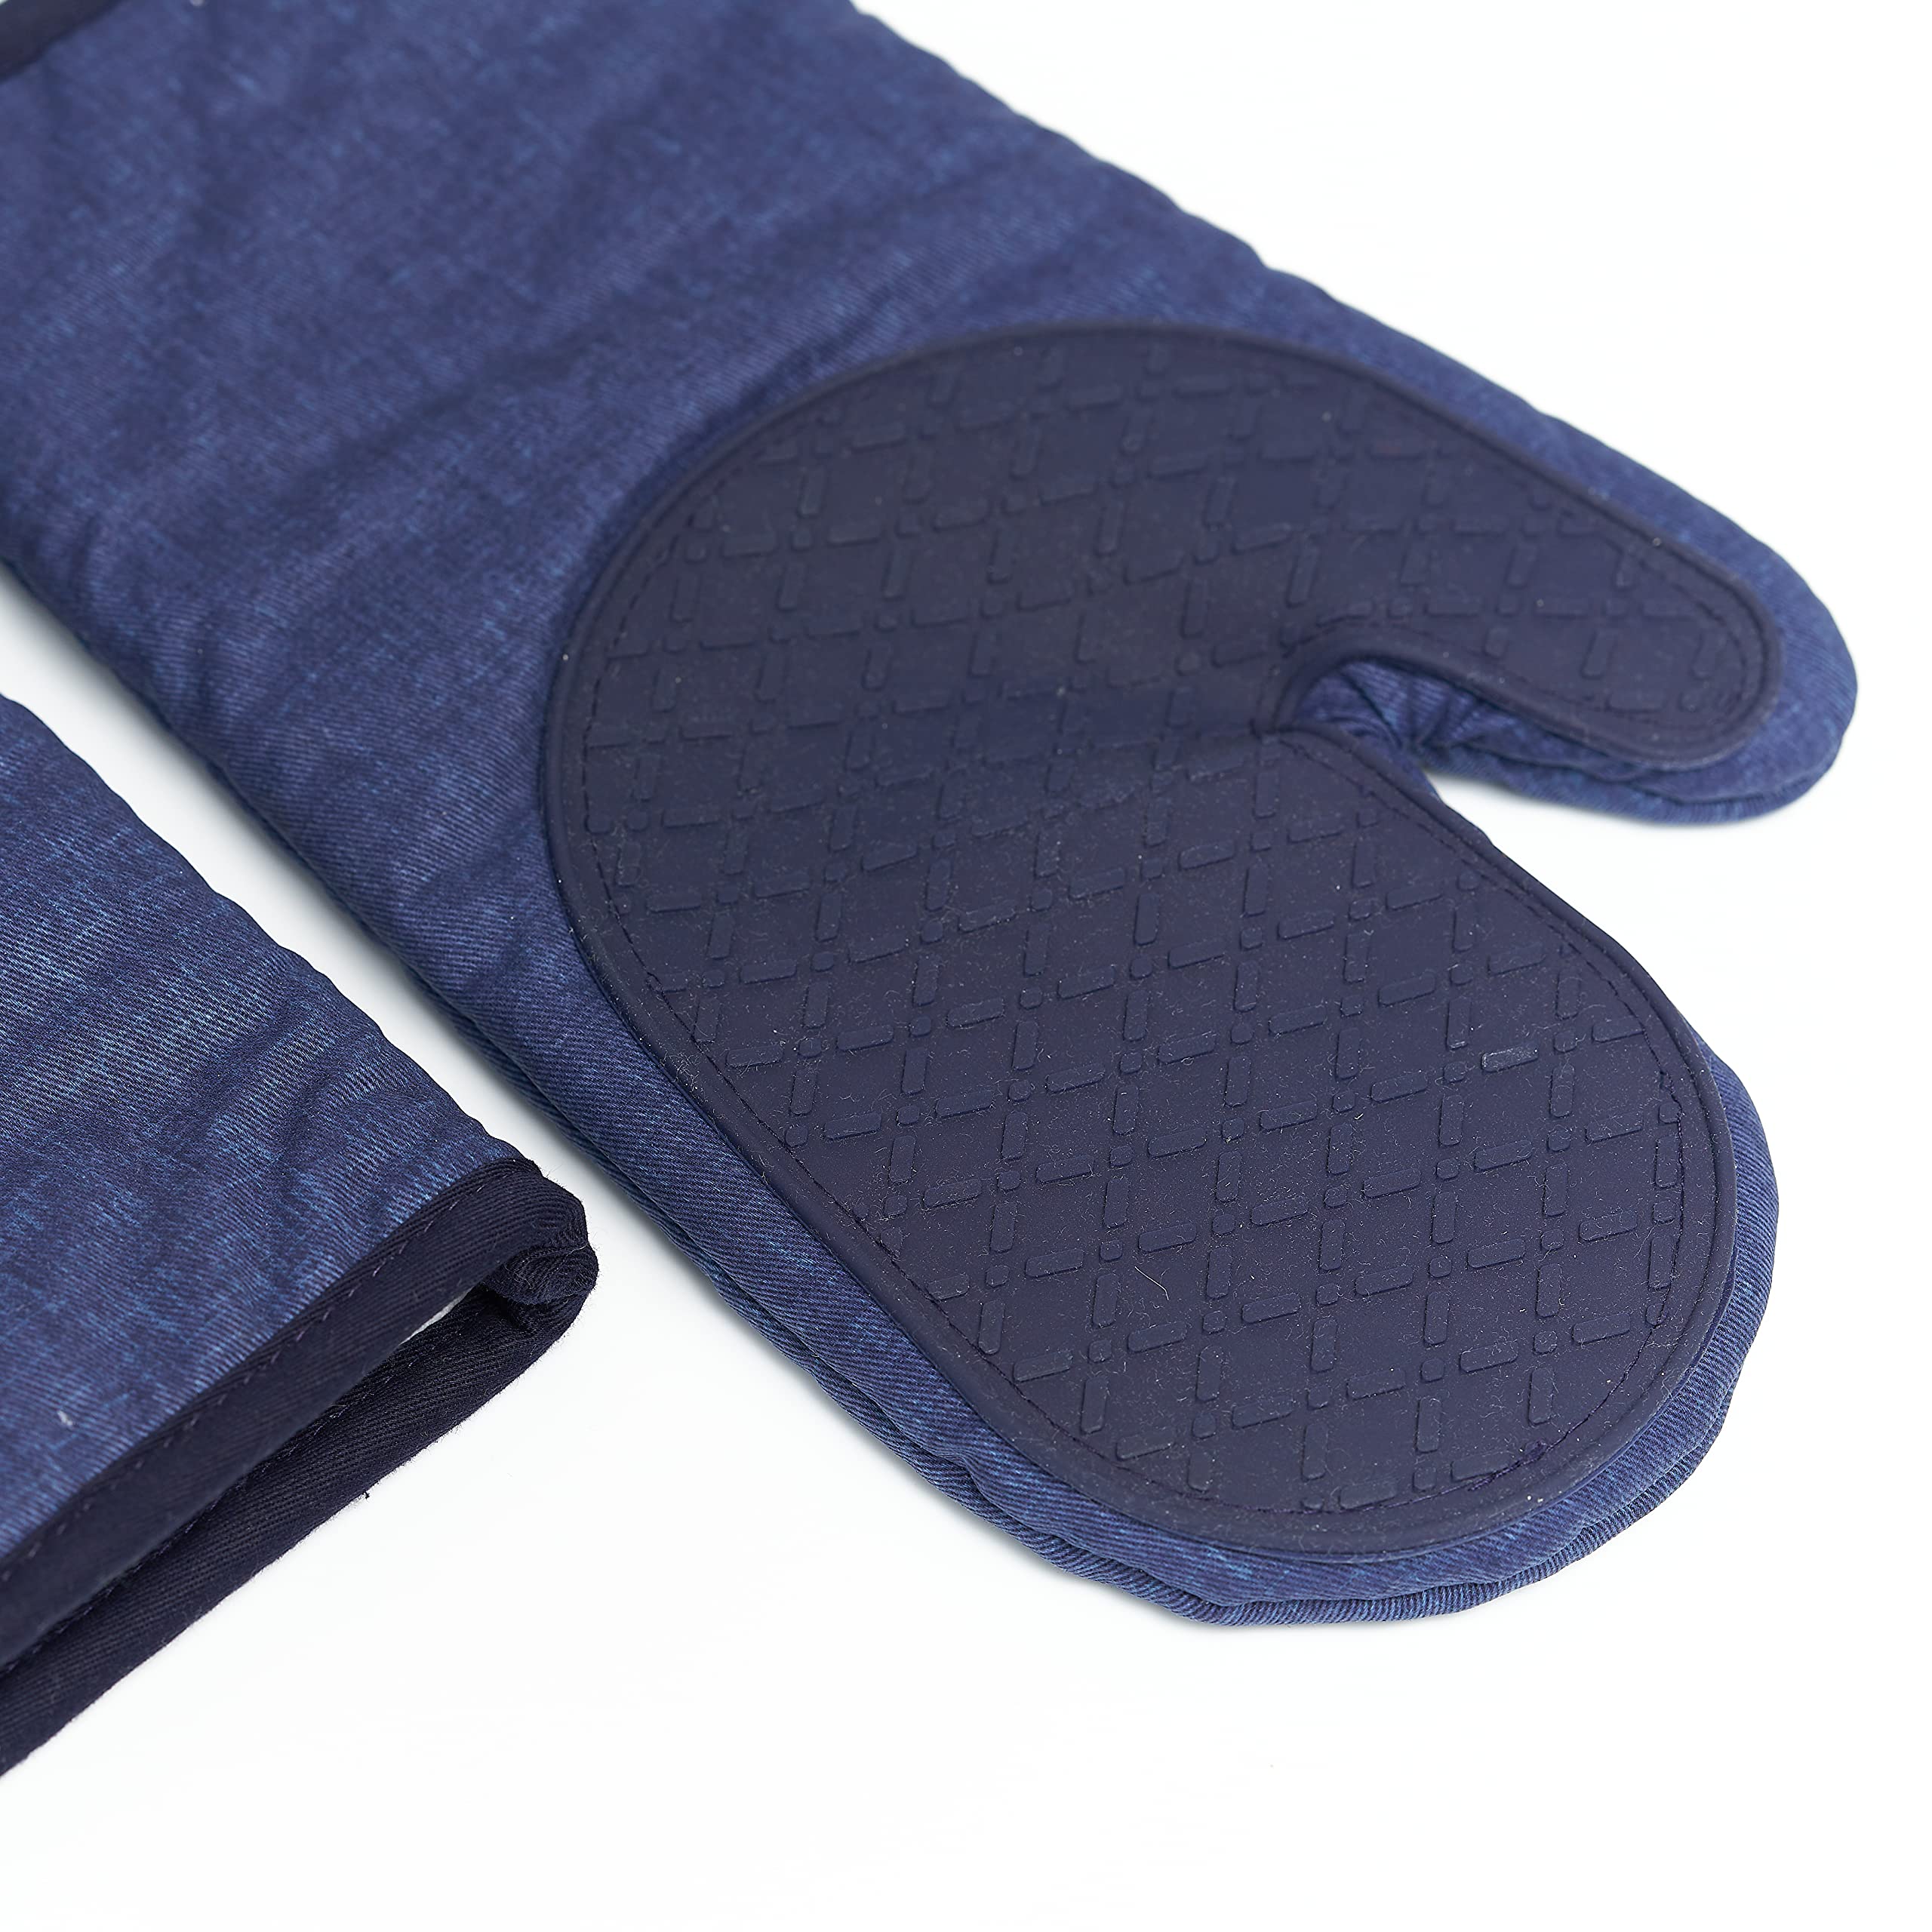 Nautica Home Kitchen Oven Mitts with Silicone Palm, Heat Resistant up to 500 Degrees F, Cotton Potholders for Cooking, Set of 2, Navy Solid